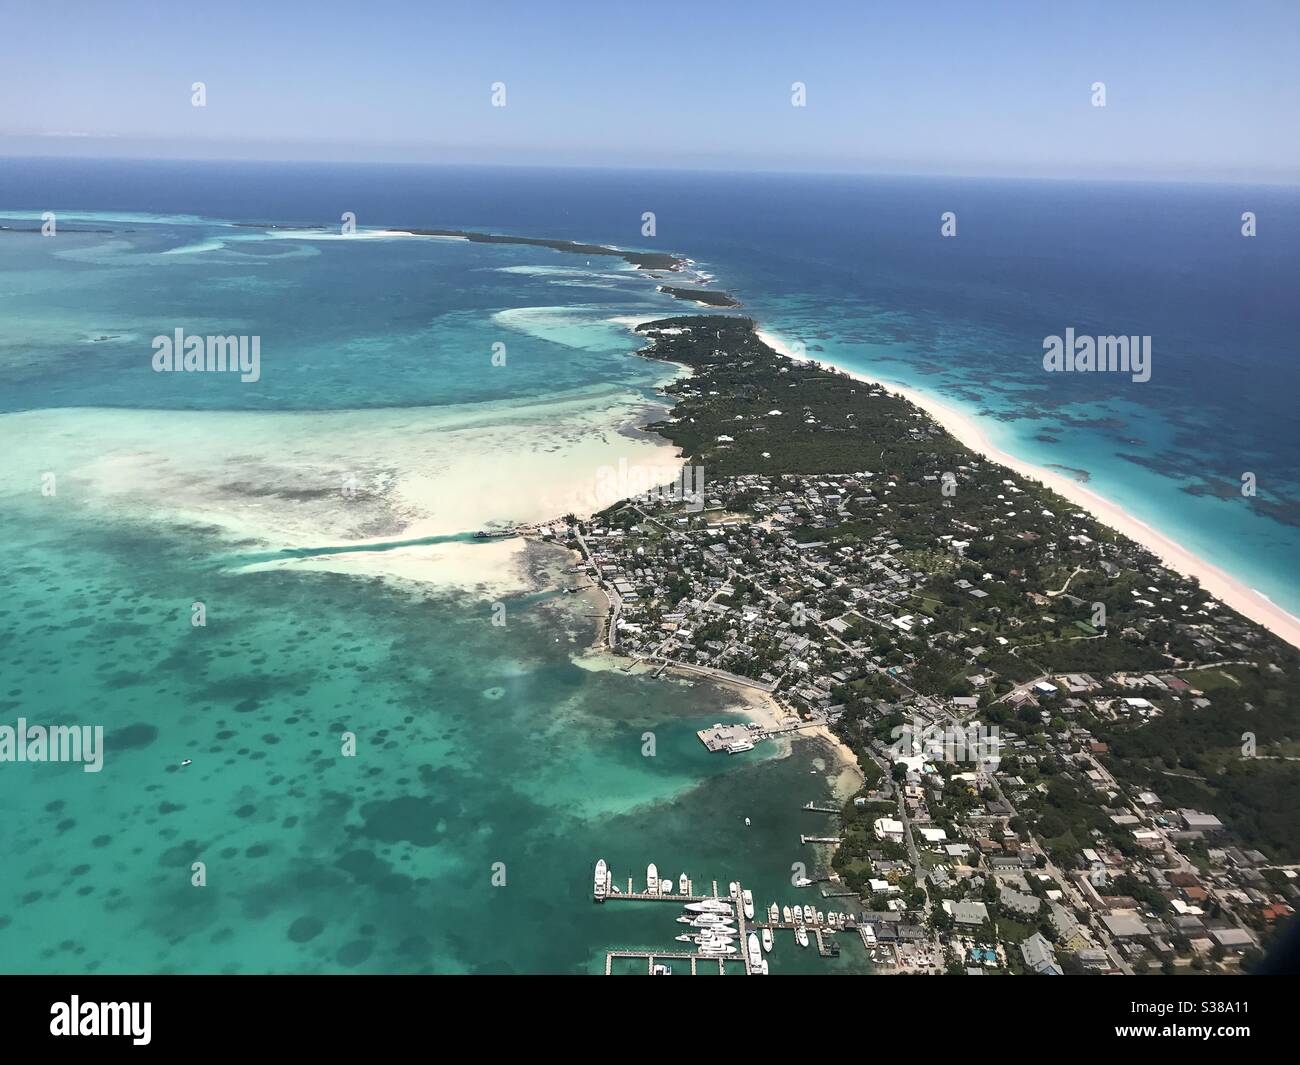 Aerial view of Dunmore Town, Harbour Island, Bahamas and its famous Pink Sand Beach. Stock Photo